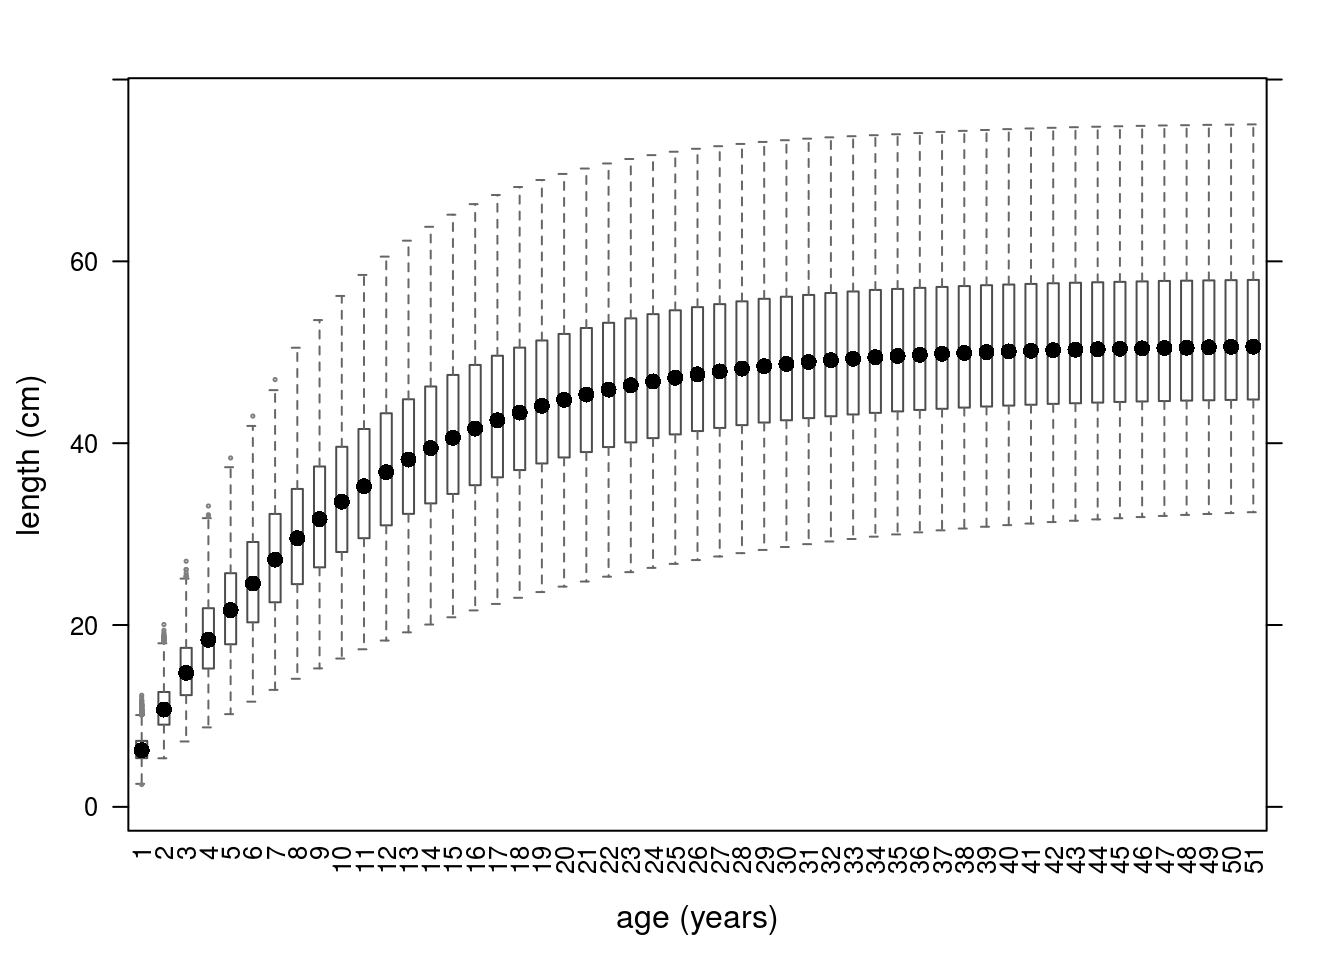 Growth curves based on the archmCopula copula with triangle margins.